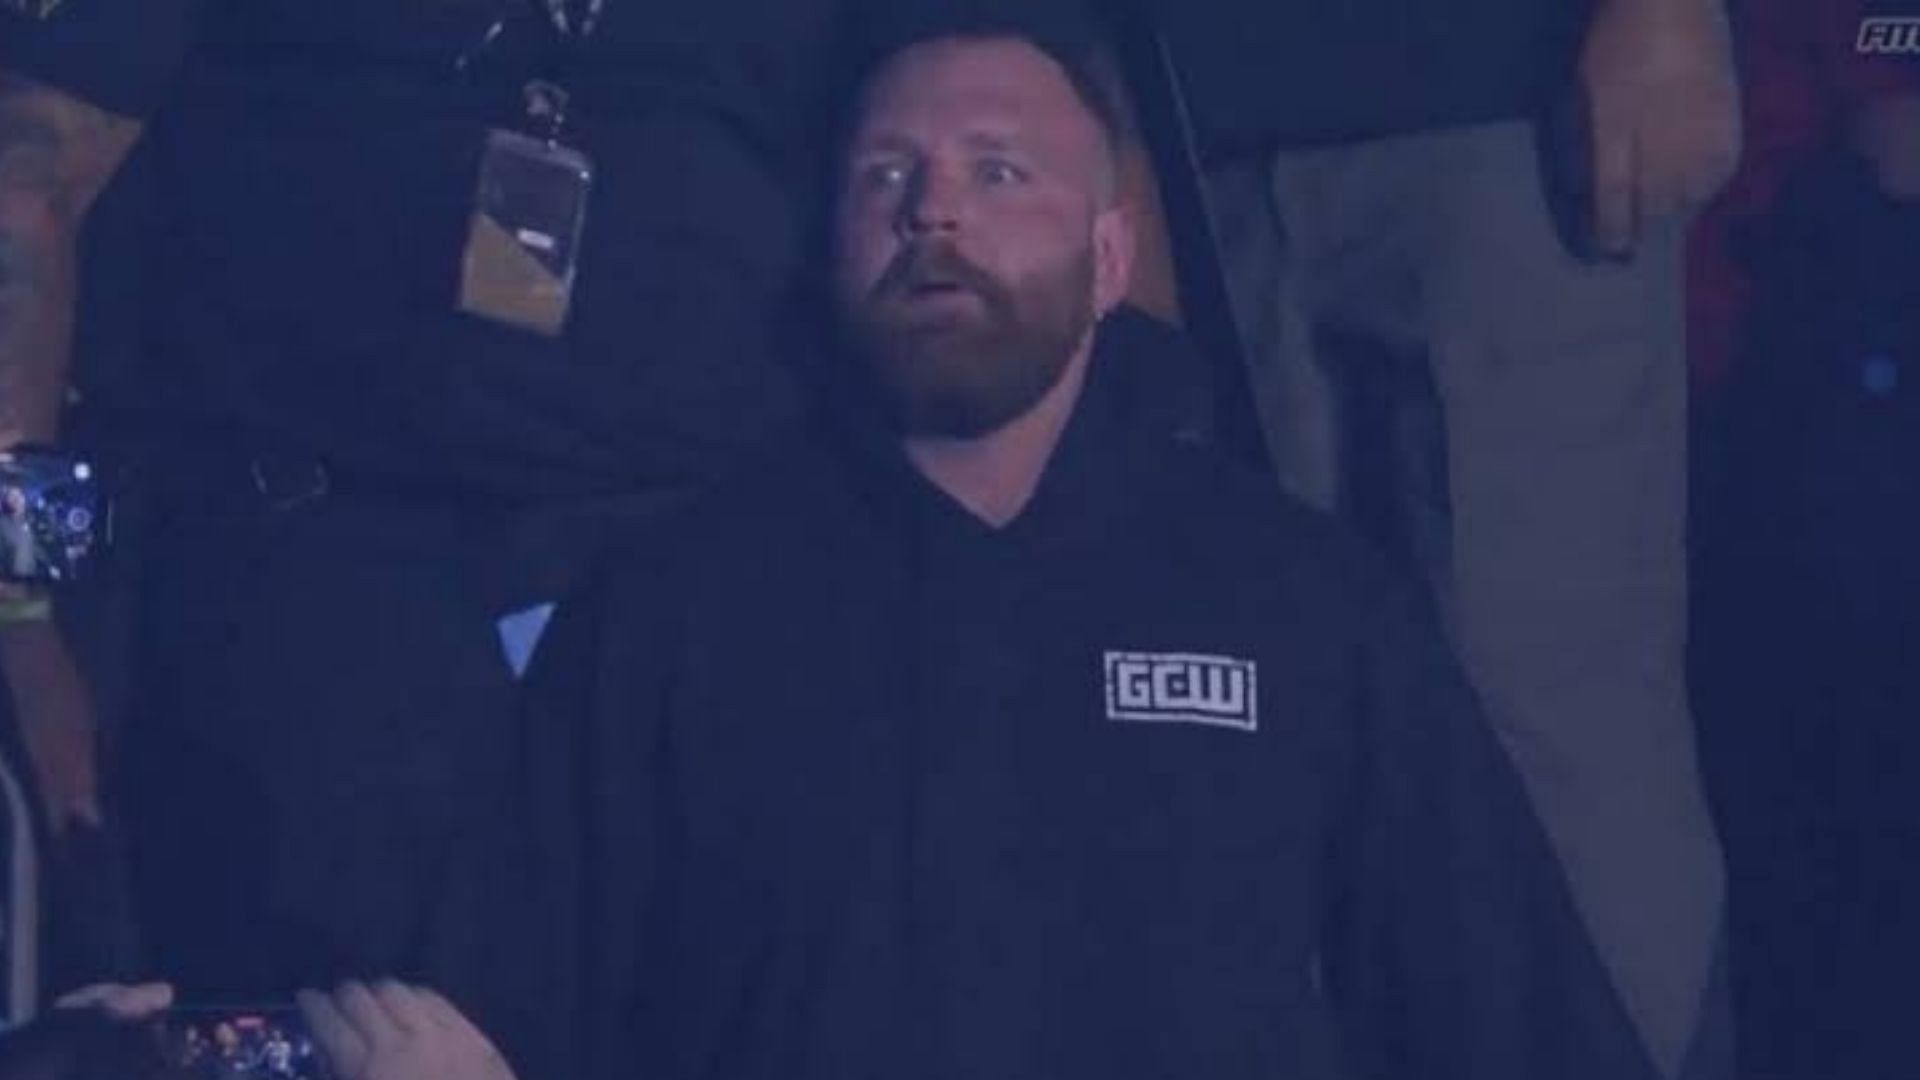 Jon Moxley is the reigning GCW World Champion